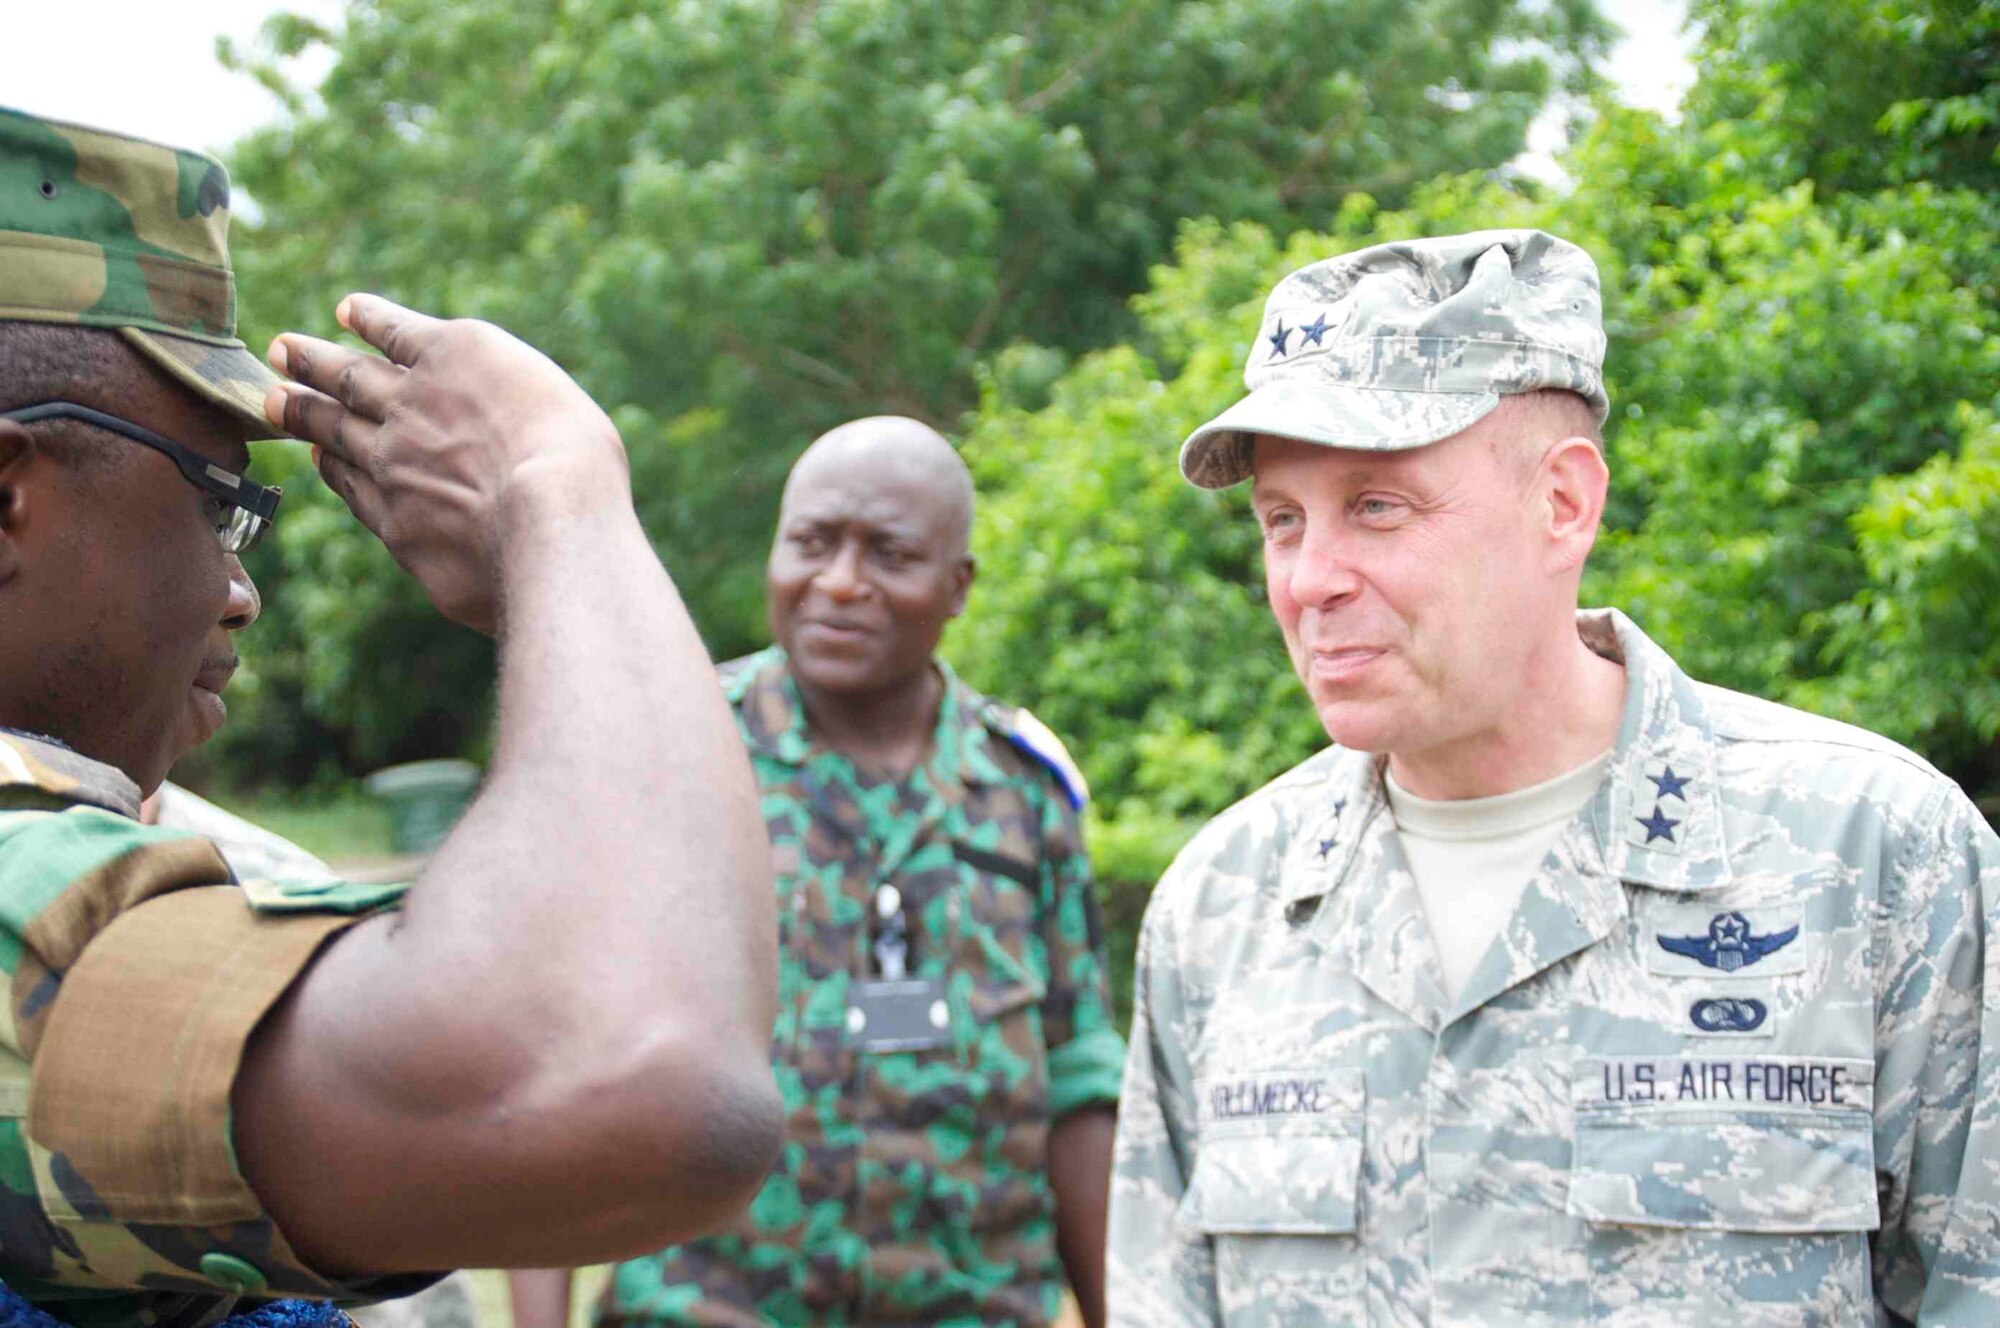 Maj. Gen. Eric Vollmecke, Western Accord 13 deputy exercise director, is saluted before touring the Bundase training camp near Accra, Ghana, June 19. Western Accord 13 is a mutually beneficial exercise hosted by U.S. Army Africa that brings together the Economic Community of West African States and the US Army to have increased capabilities to support regional peacekeeping operations. (Photos by: Sgt. Tyler Sletten, 116th Public Affairs Detachment)